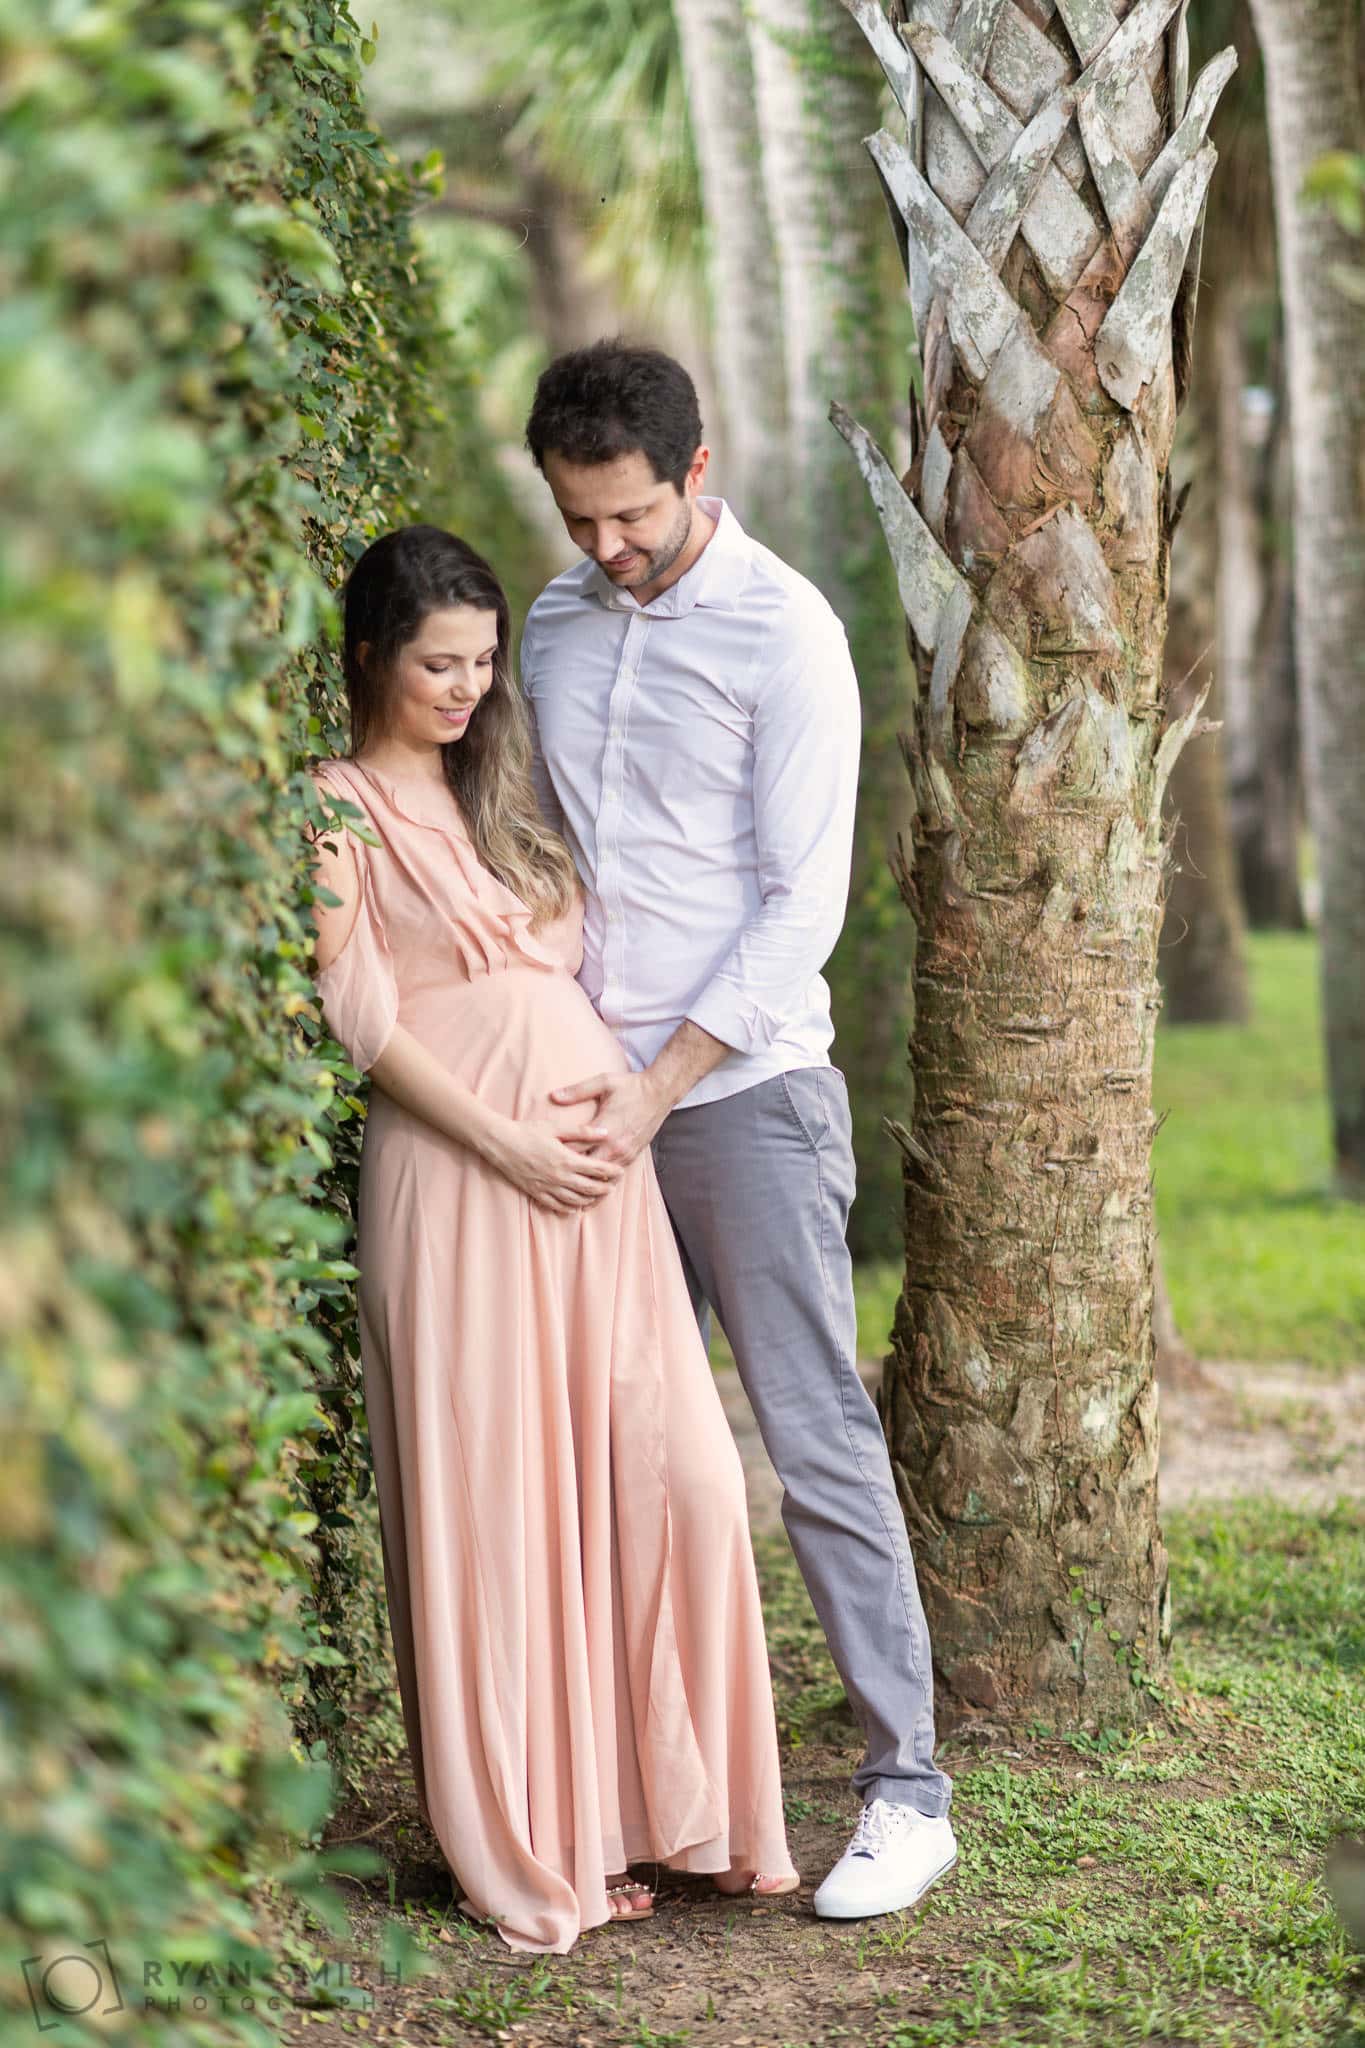 Husband and wife taking maternity portraits by the ivy wall - Atalaya Castle